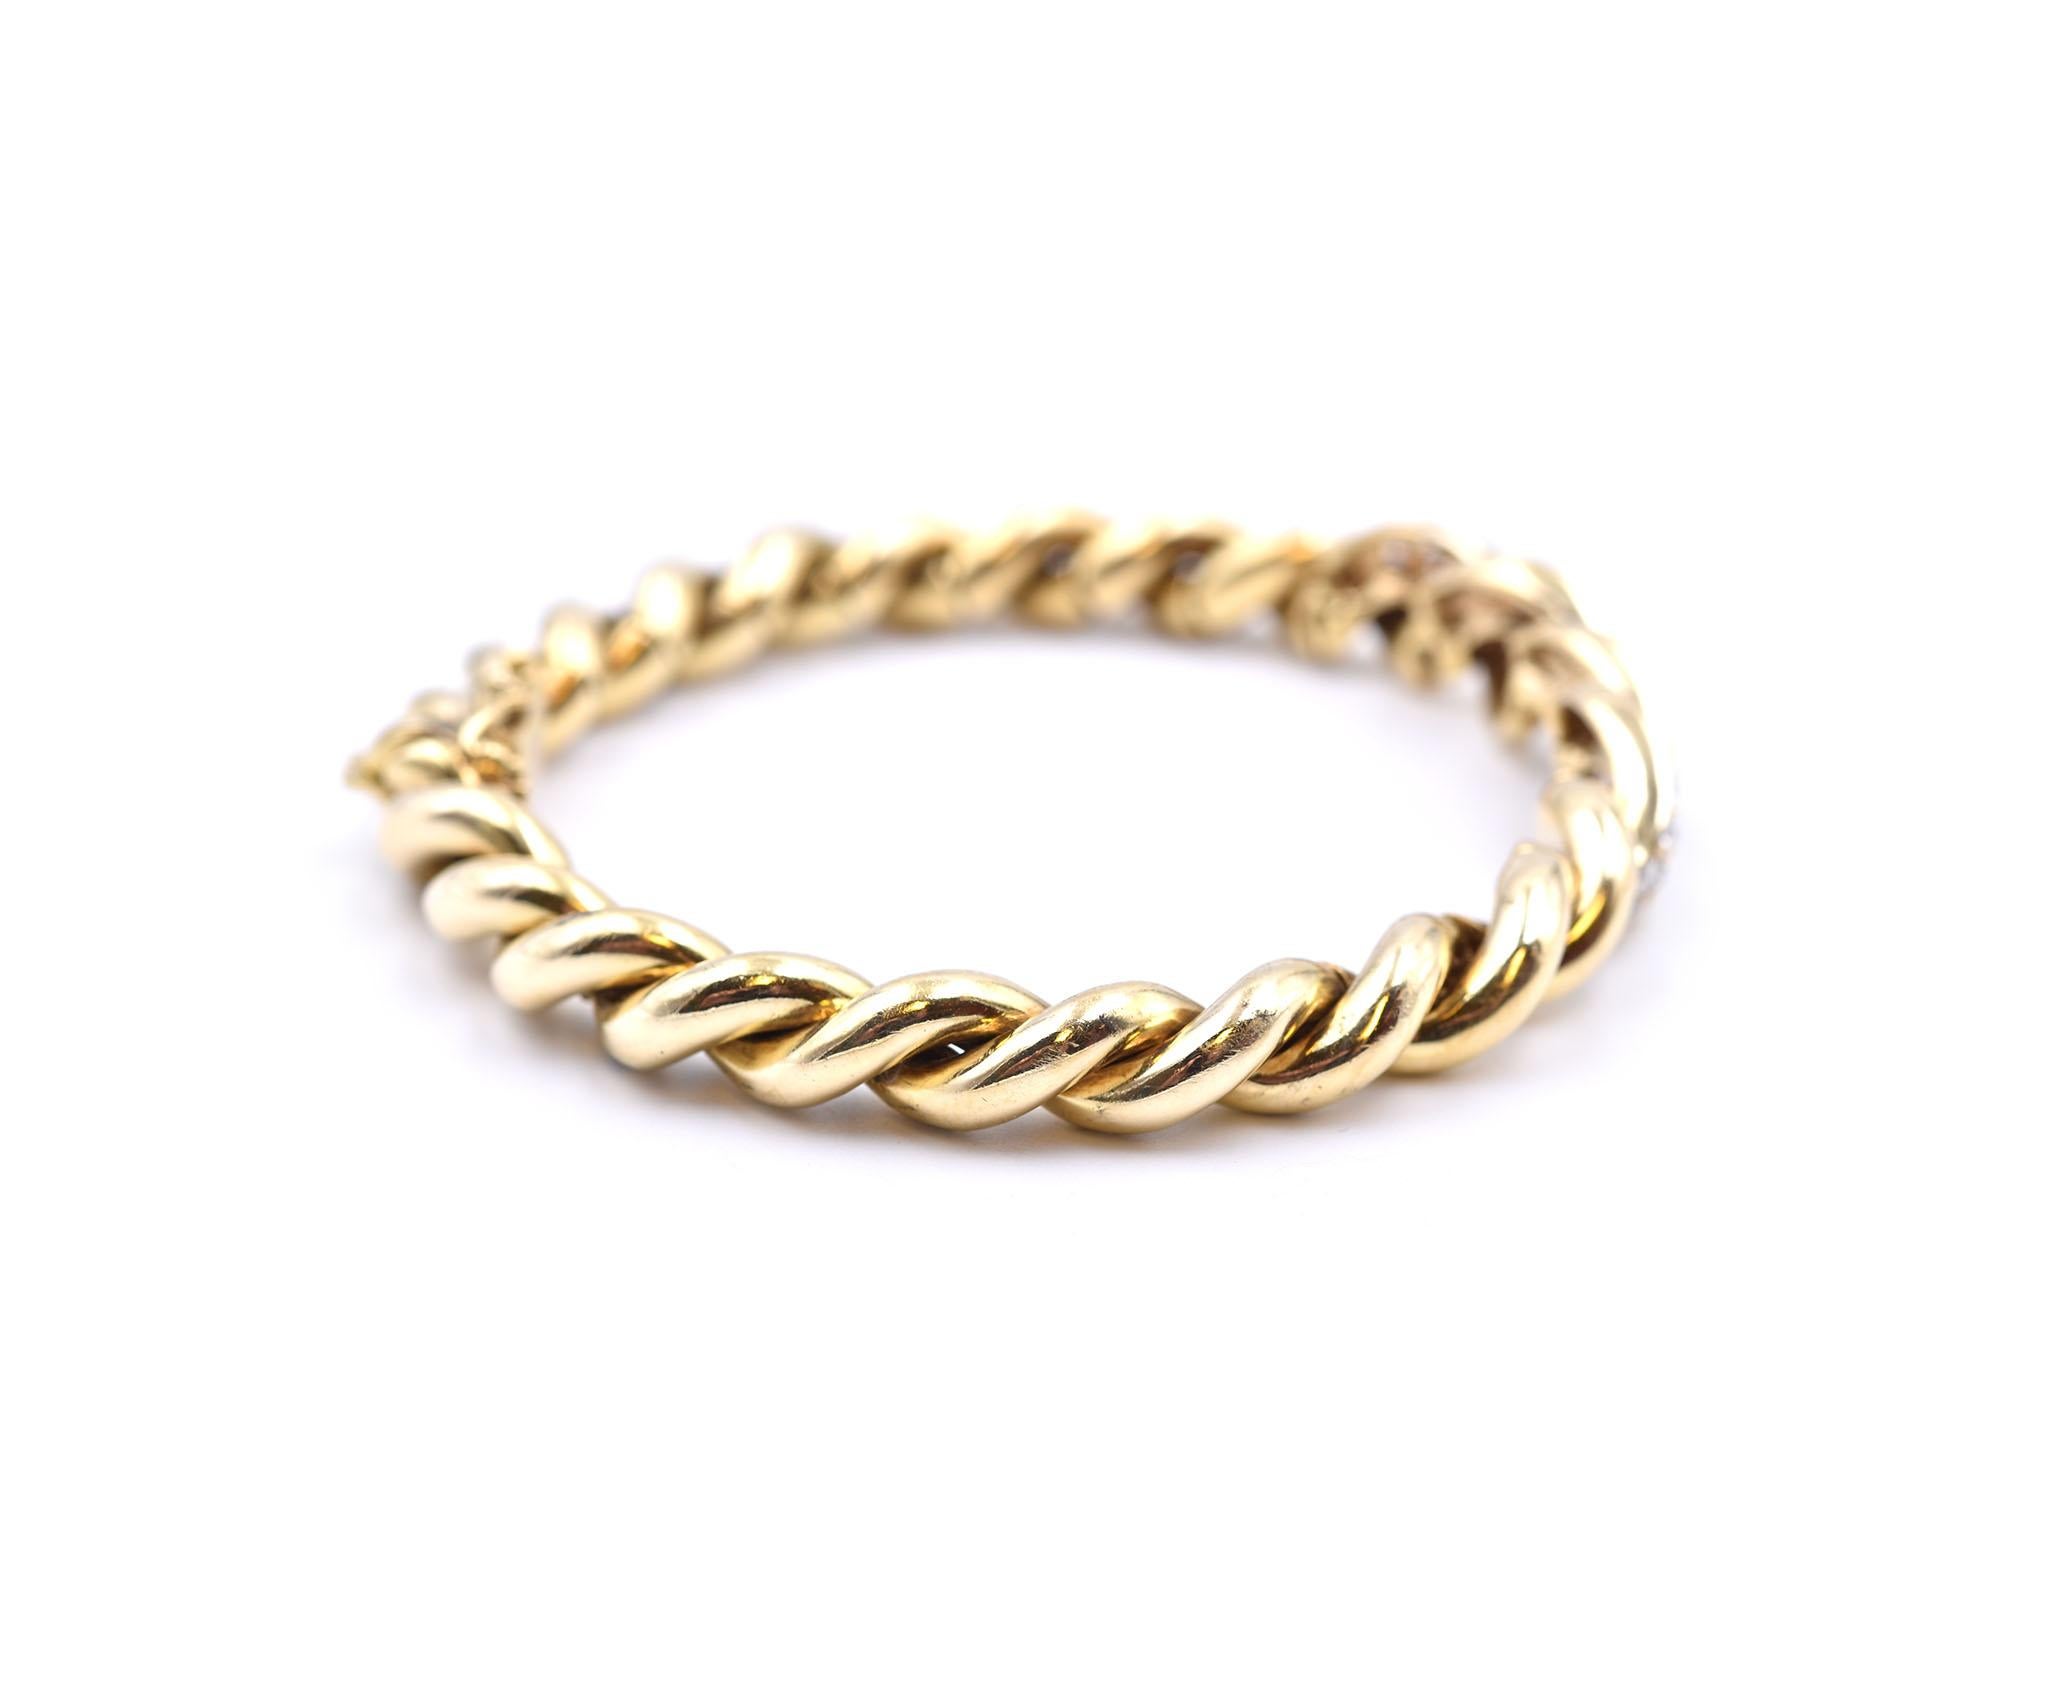 Designer: custom
Material: 18k yellow gold
Diamonds: 56d = 2.25cttw
Color: I
Clarity: SI1
Dimensions: bracelet will fit up to a size 7 wrist and measures 10.45mm in width at its widest point
Weight: 42.44 grams
